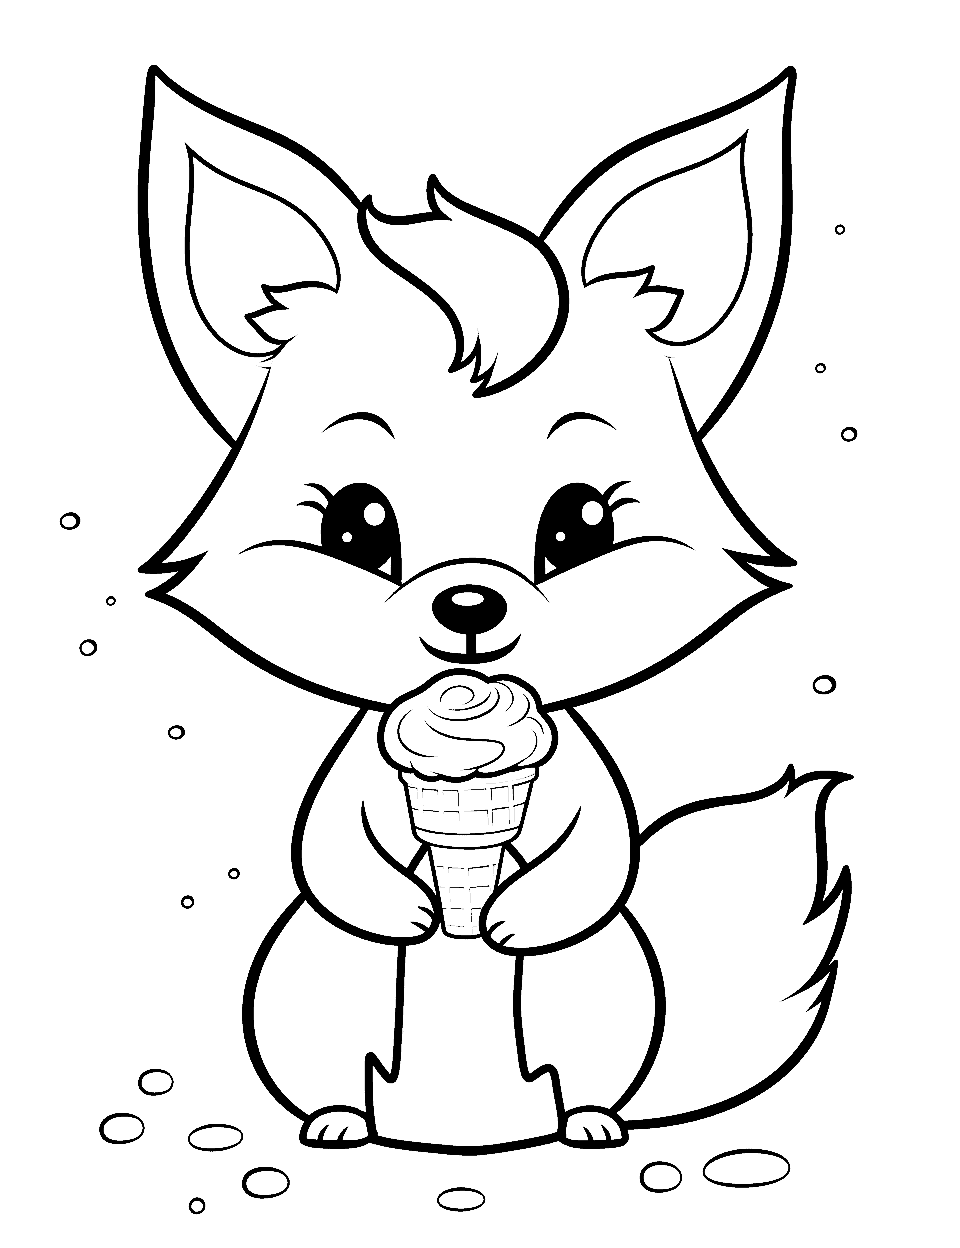 Chibi Fox's Ice Cream Day Fox Coloring Page - A little fox, eyes wide in delight, holding a giant ice cream cone.